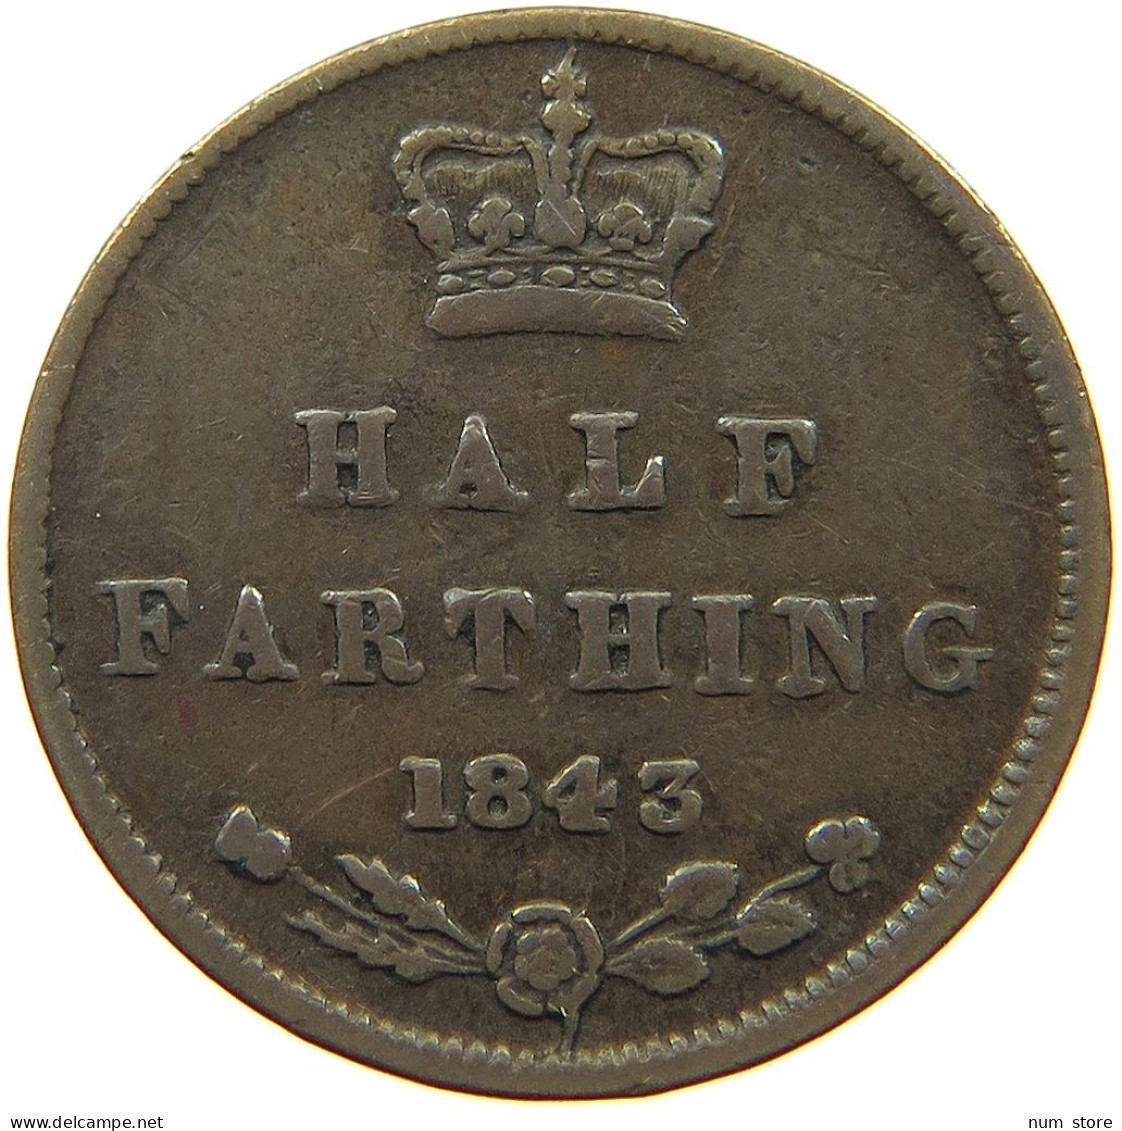 GREAT BRITAIN HALF FARTHING 1843 Victoria 1837-1901 #t073 0233 - A. 1/4 - 1/3 - 1/2 Farthing